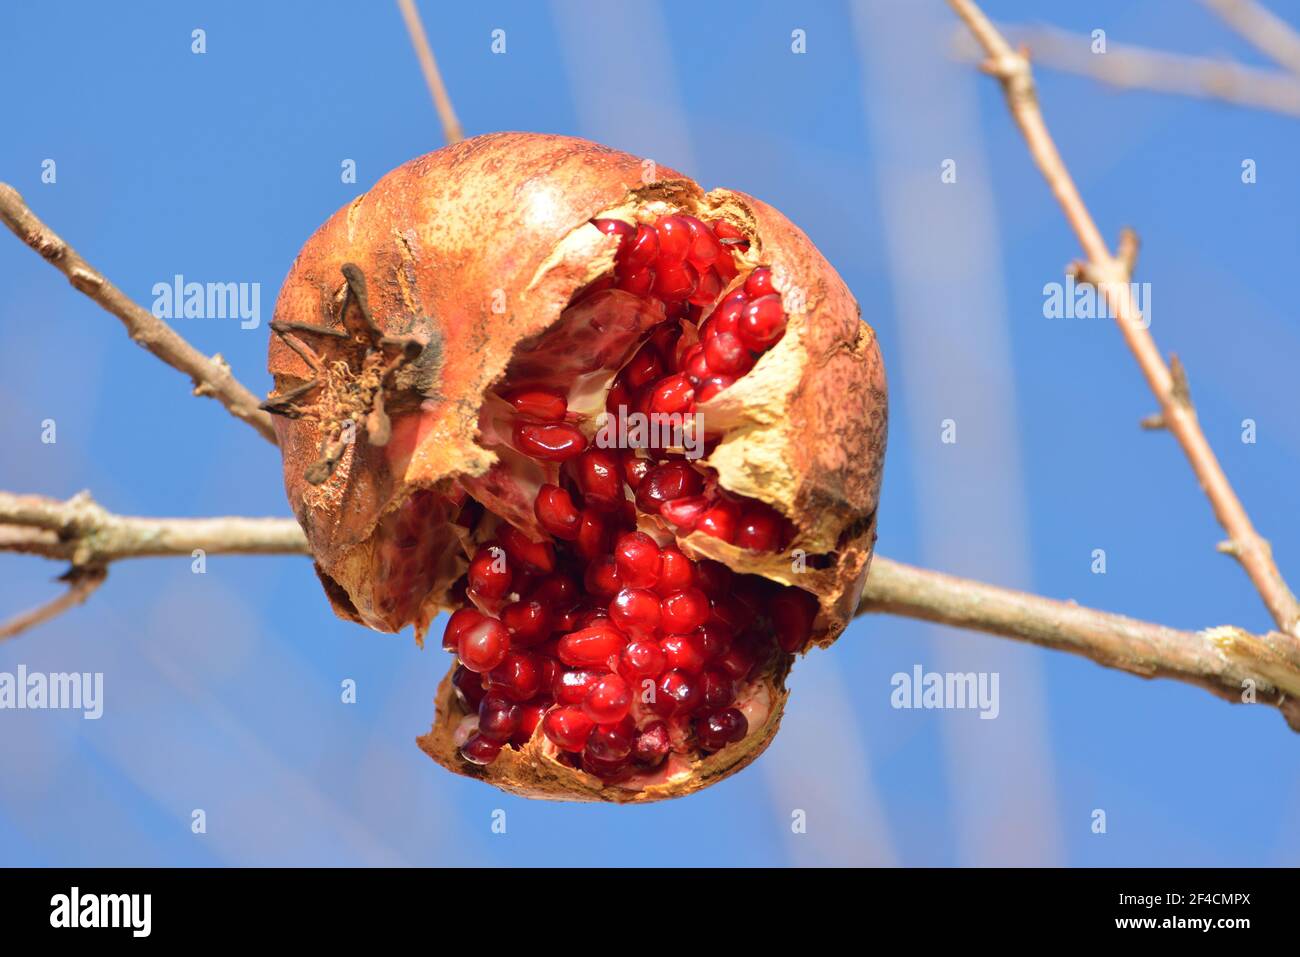 The pomegranate is the fruit of the pomegranate tree, this fragmented pomegranate contains 400 red seeds, whose juice is rich of antioxidant. Stock Photo